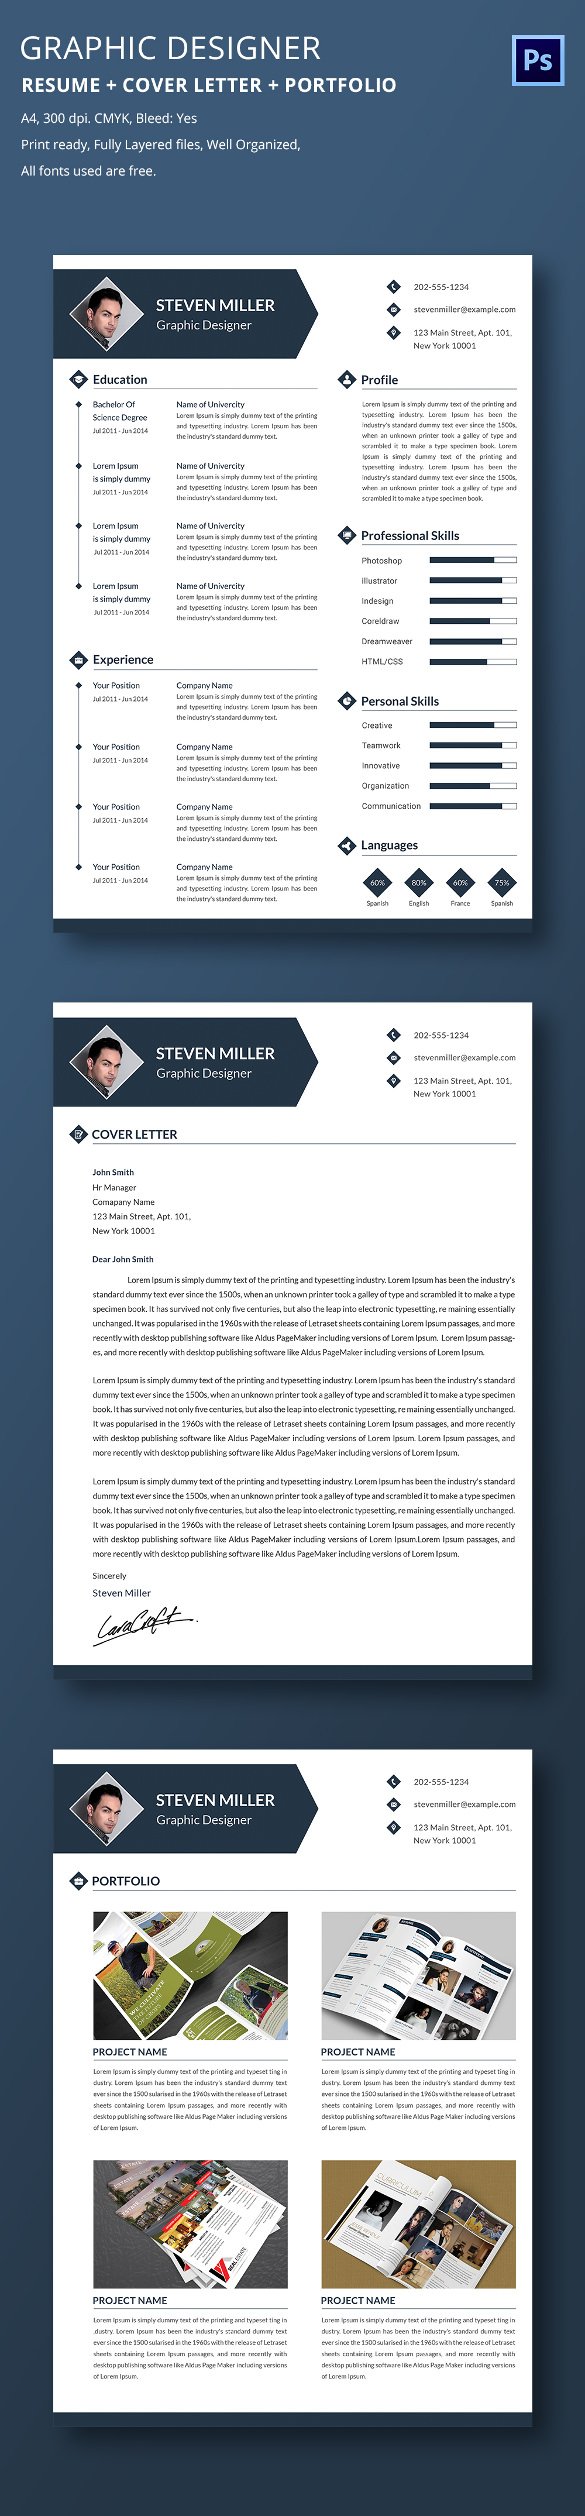 28+ Resume Templates for Freshers - Free Samples, Examples ...